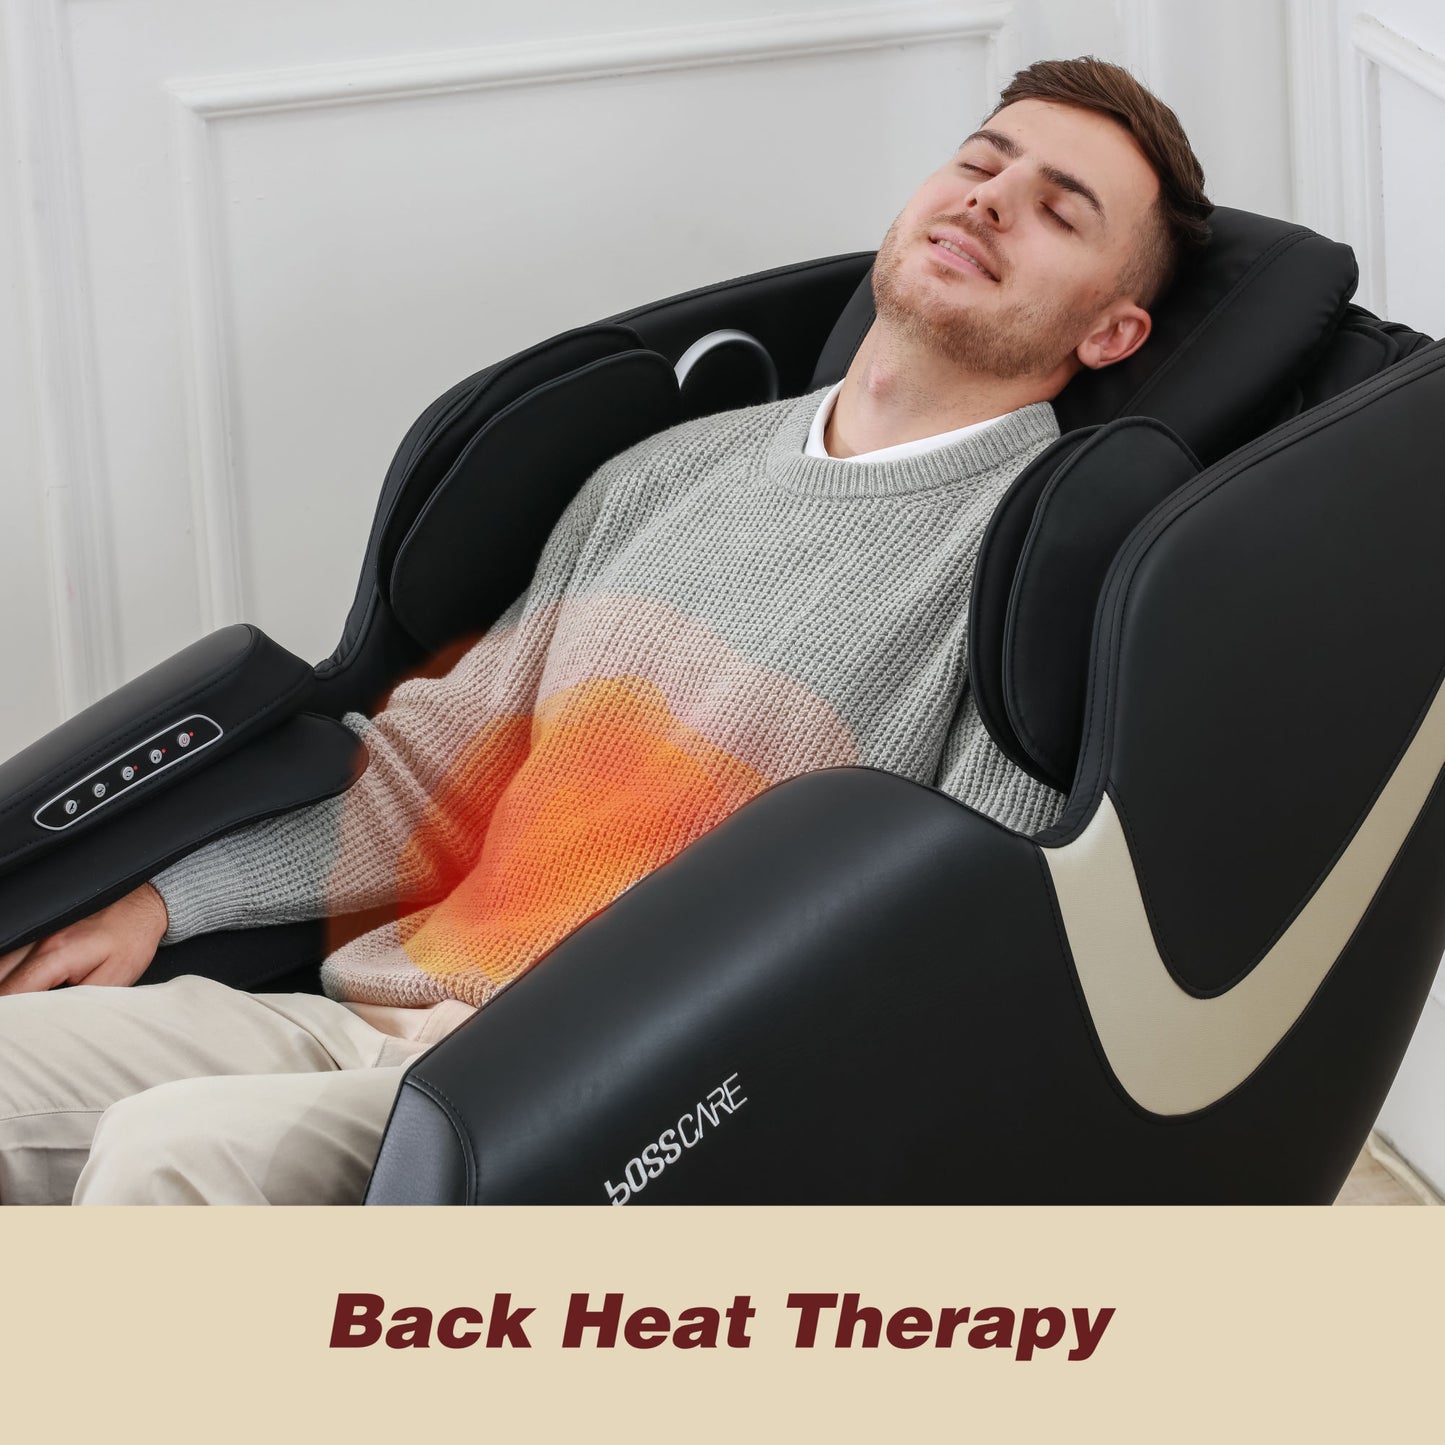 Massage Chair Recliner with Zero Gravity, Heated Back, Foot Roller and Bluetooth by Bosscare